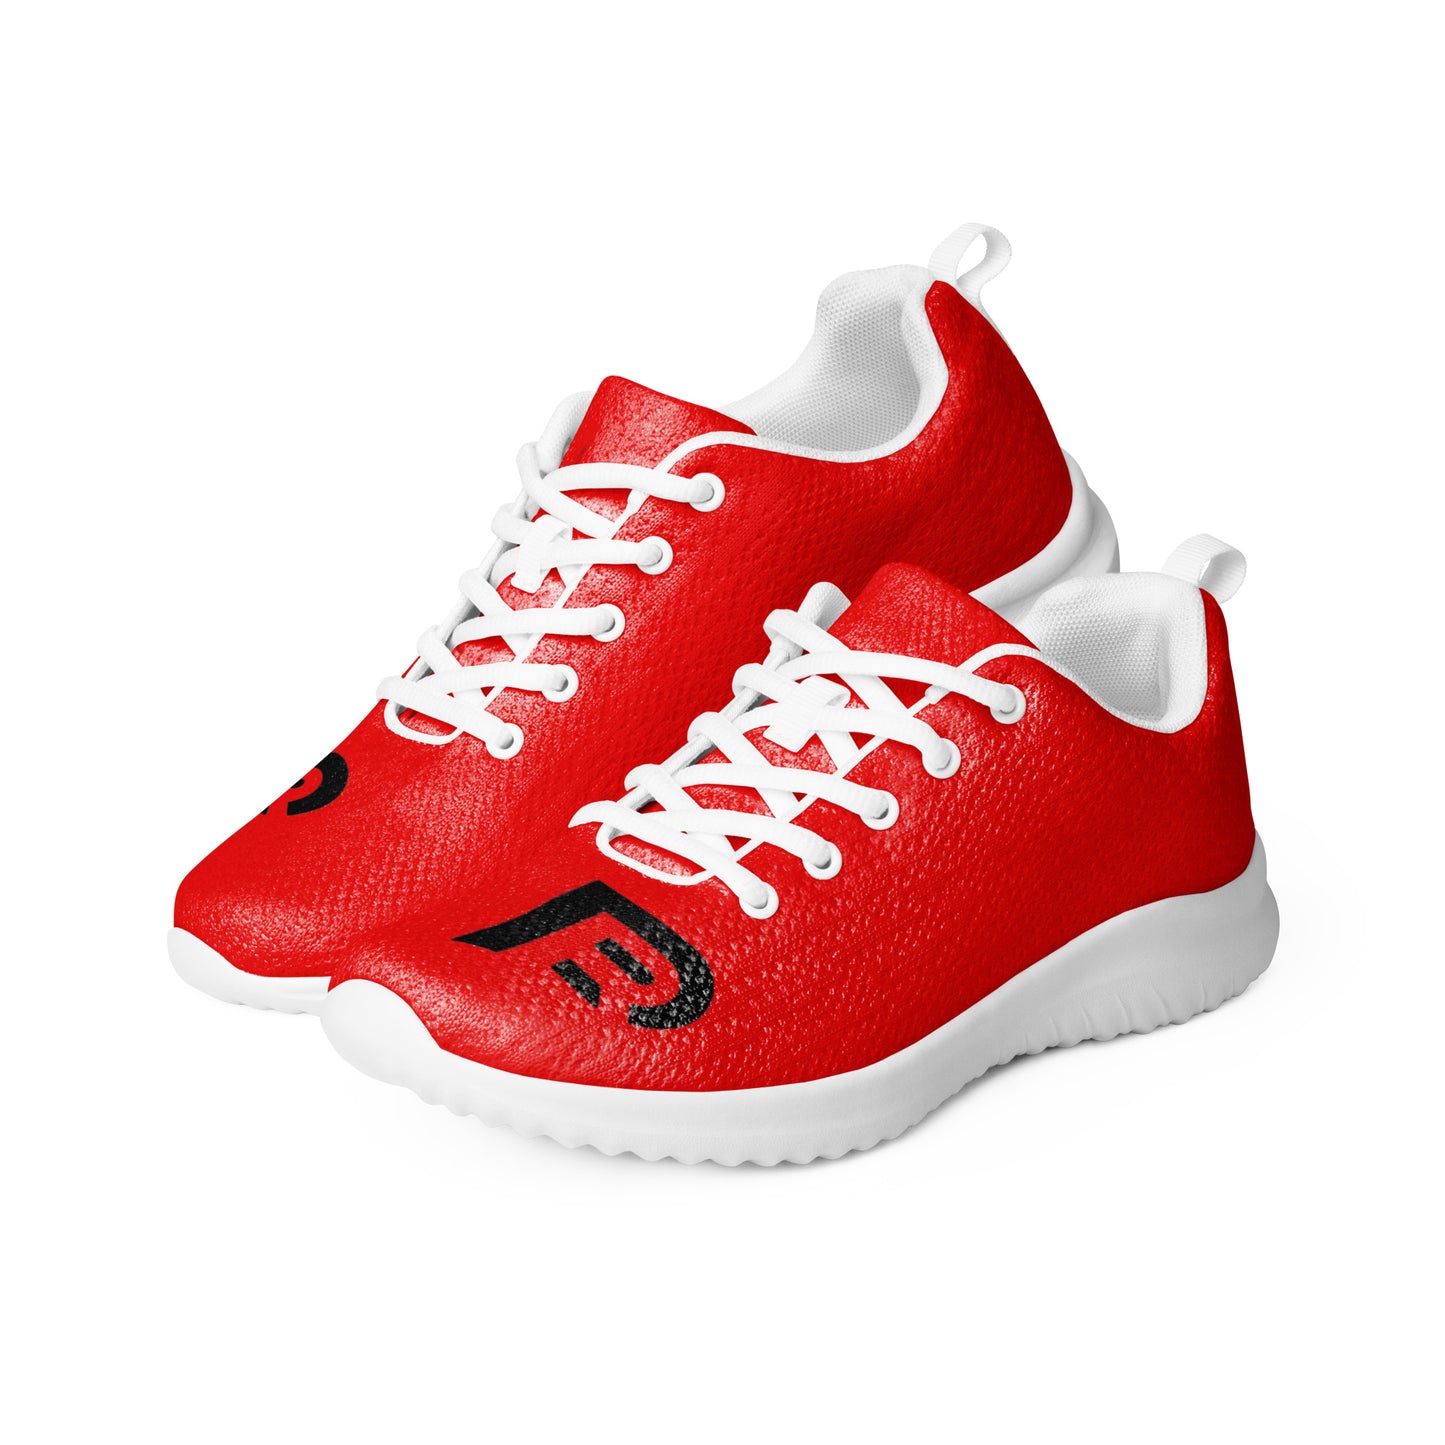 Red Weapon Redline Cross Training Shoes